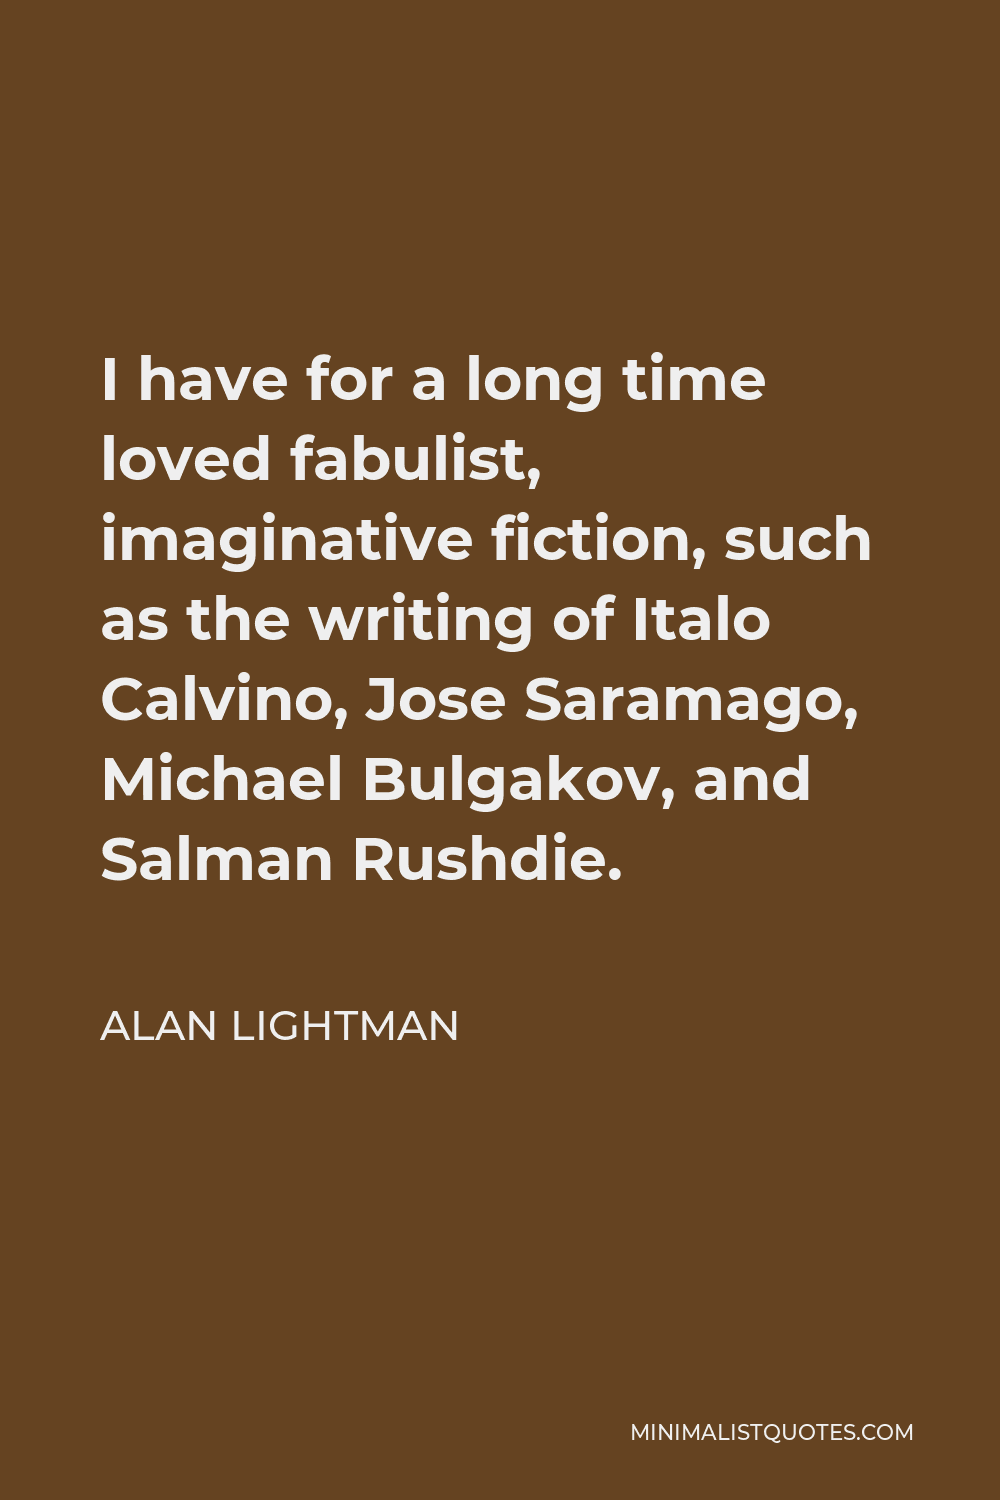 Alan Lightman Quote - I have for a long time loved fabulist, imaginative fiction, such as the writing of Italo Calvino, Jose Saramago, Michael Bulgakov, and Salman Rushdie.